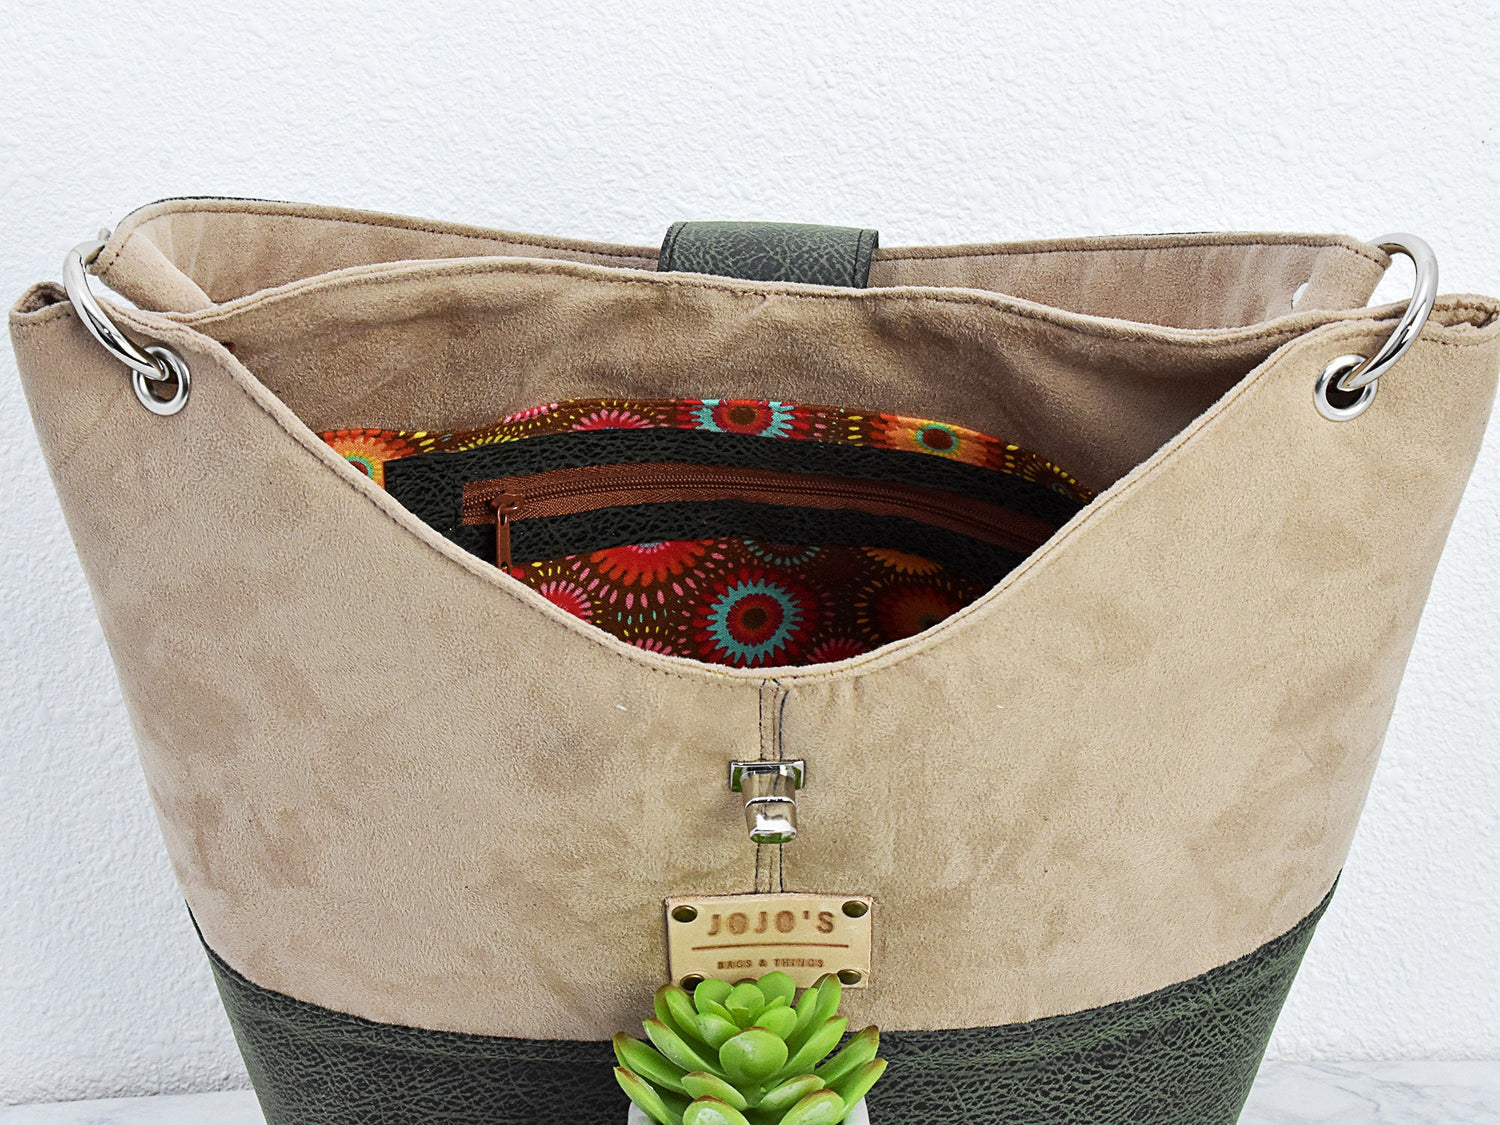 Women's Shoulder Bag - Faux Suede Satchel - Green Ladies Purse - Handmade Handbag - Gift for Wife Mom or Grandmother - One of a Kind